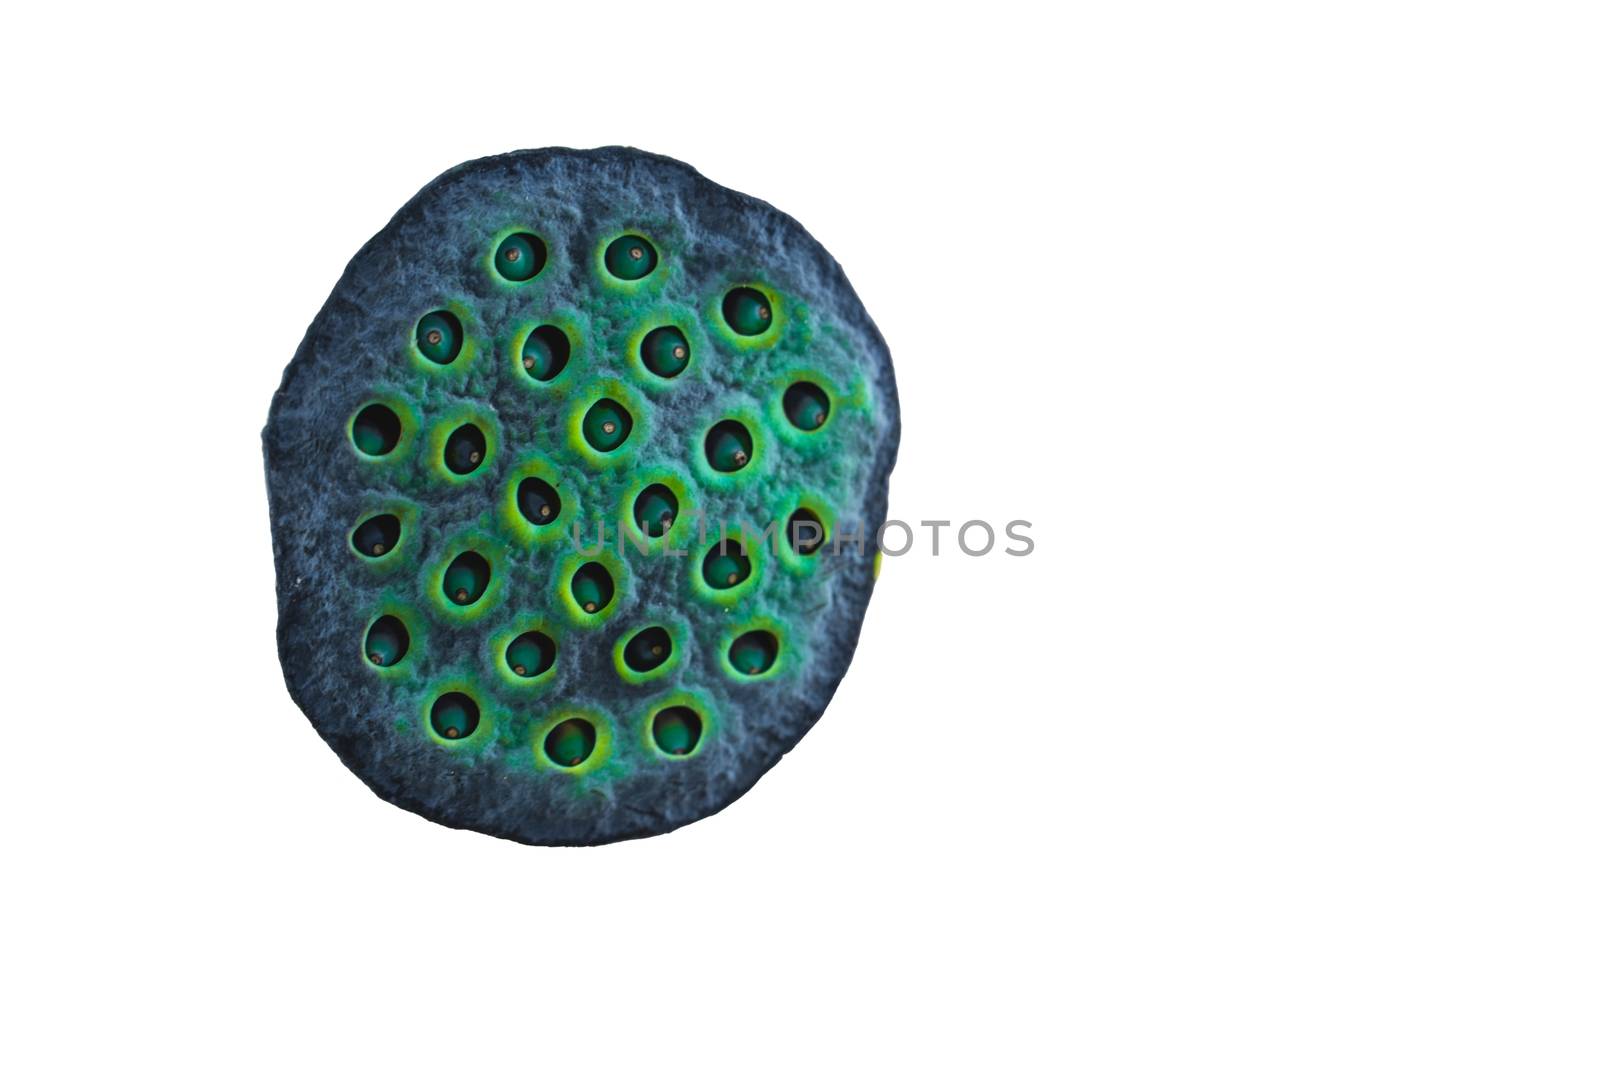 Lotus seed pods isolate on white background with space for putting text. Green lotus seed pods background by peerapixs